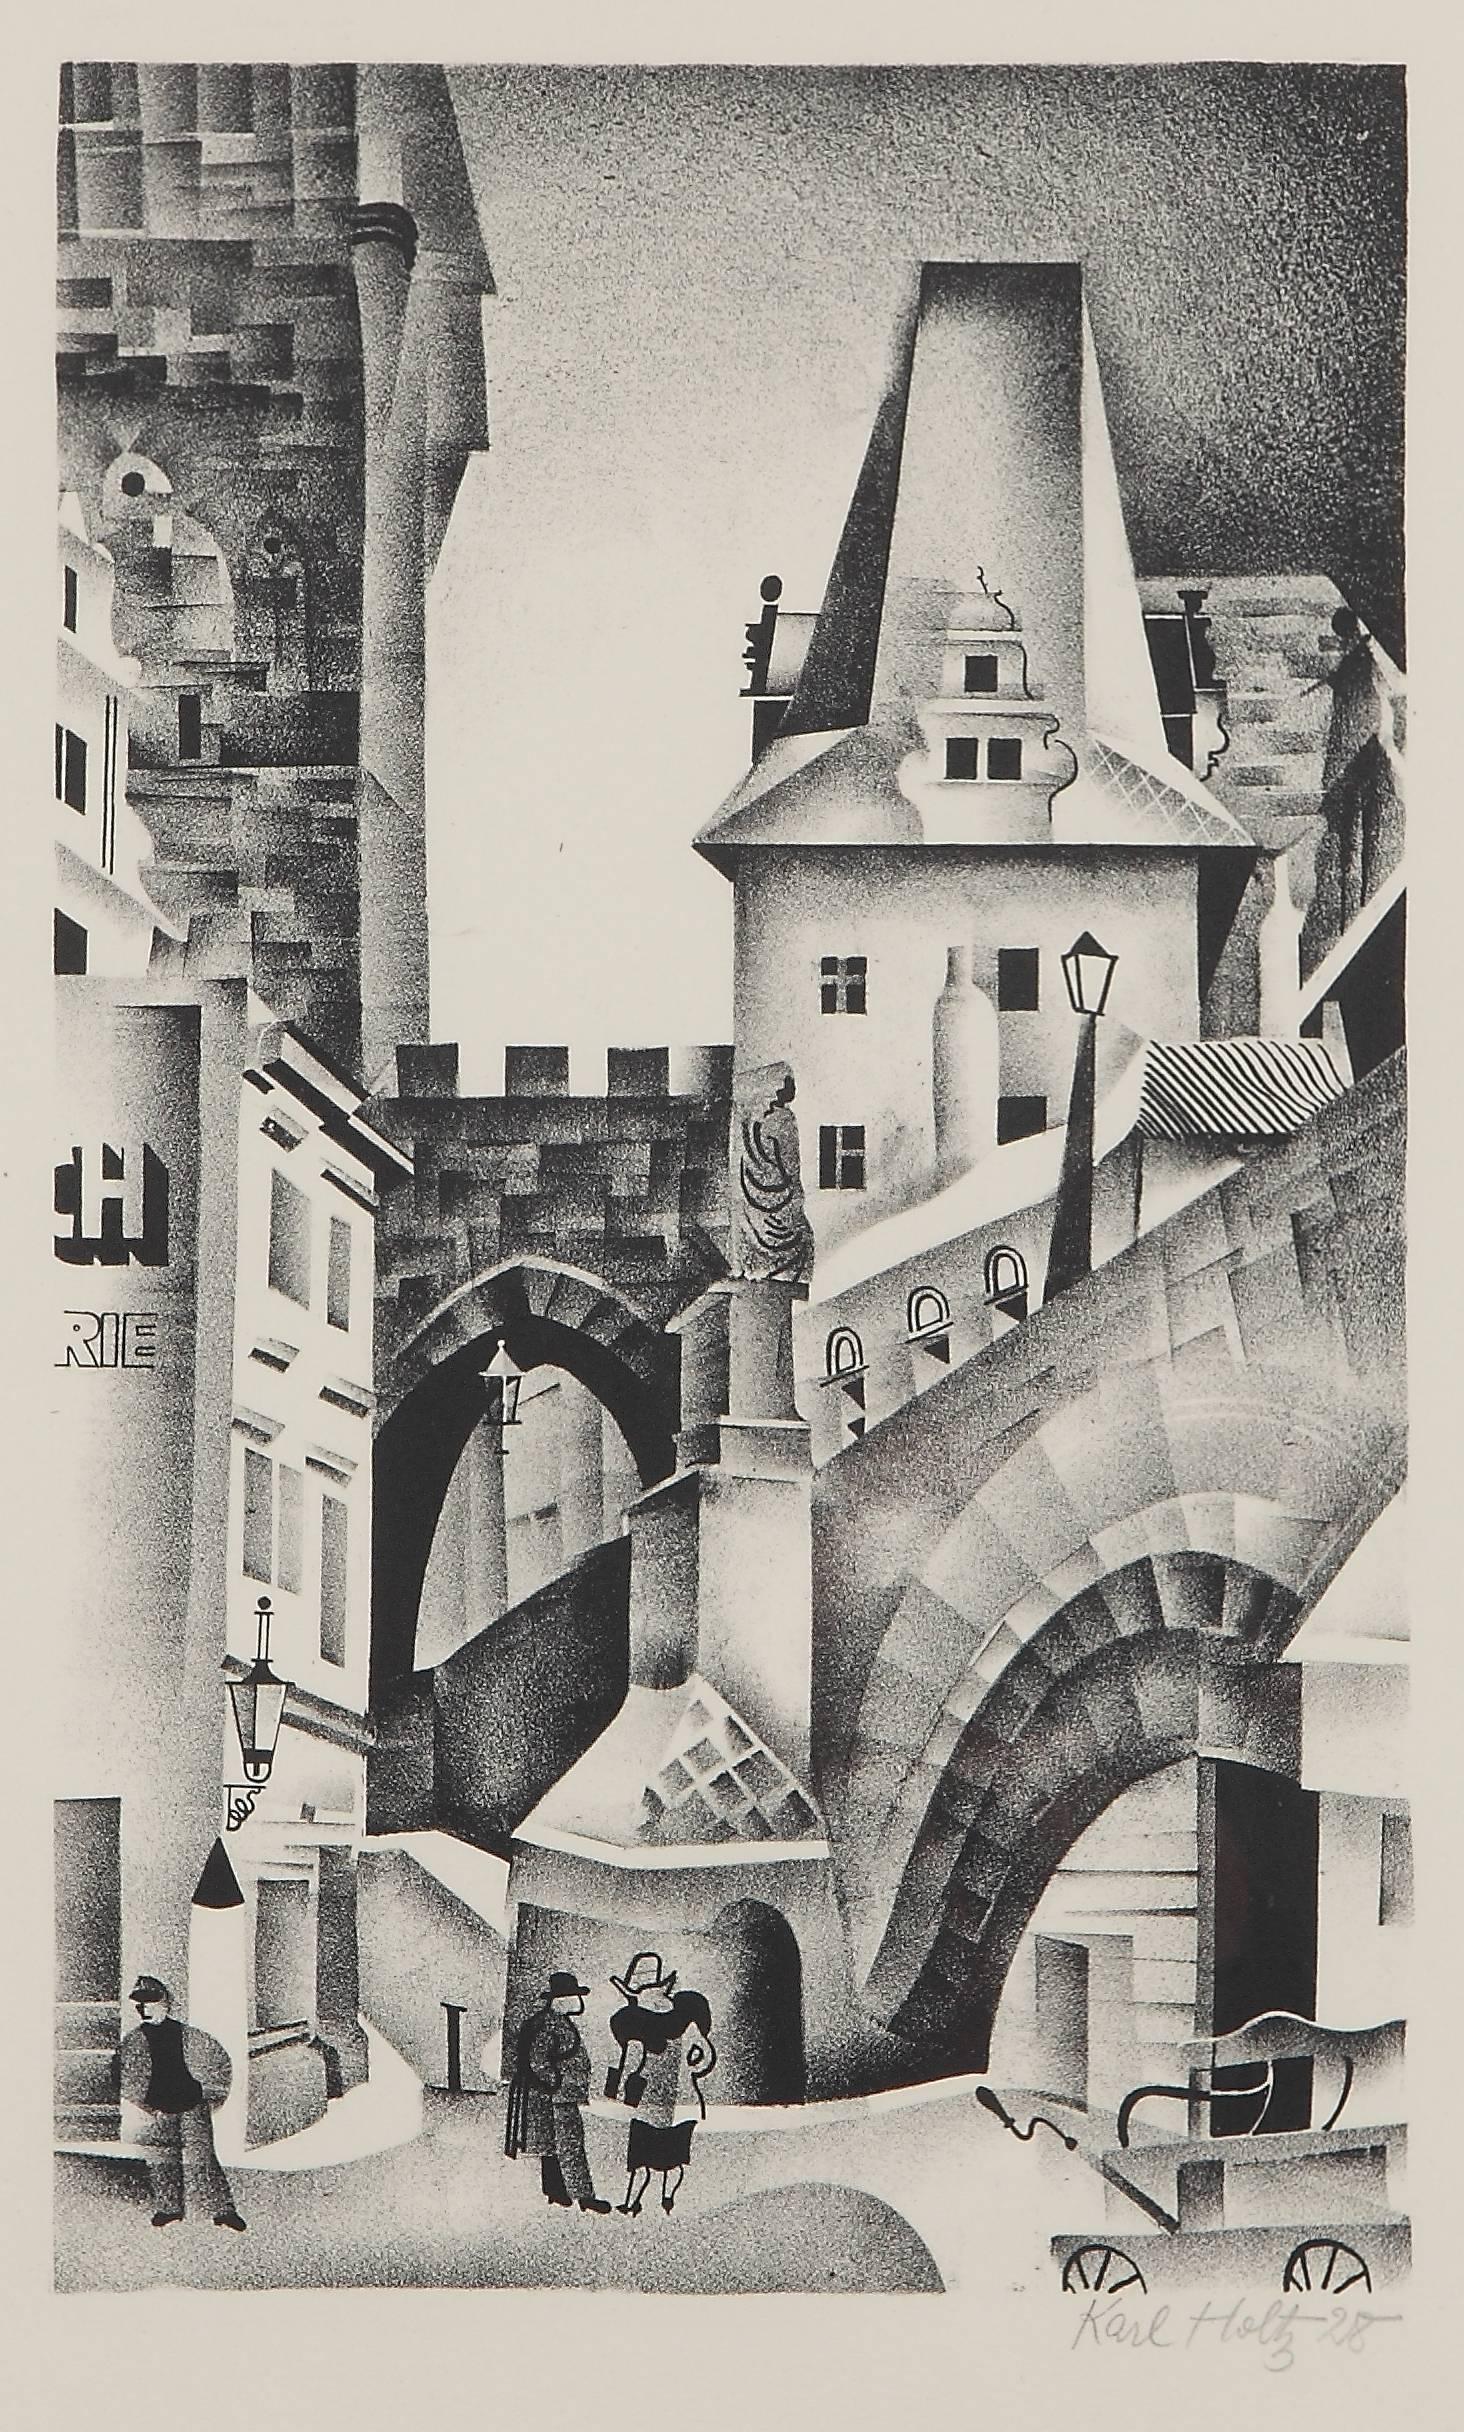 Lithograph, 1928 by Karl Holtz ( Germany ). Signed and dated lower right: Karl Holtz 28. Framed. Dimensions: 13.19 x 8.27 in ( 33,5 x 21 cm )
